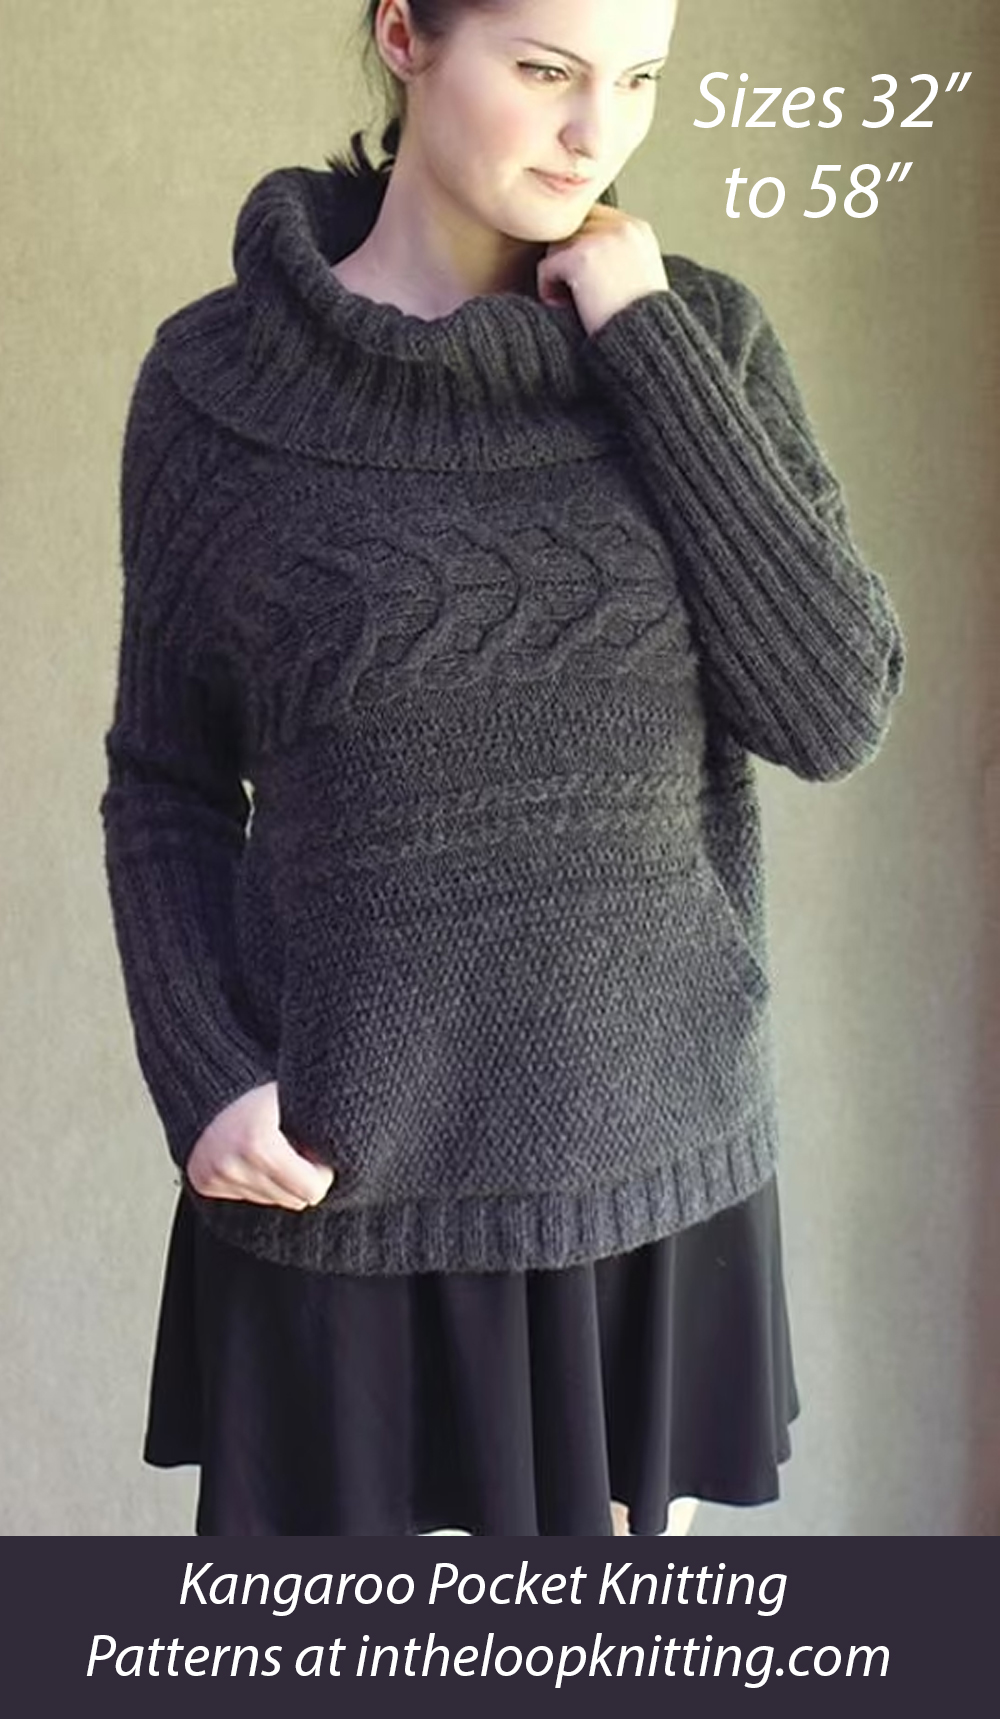 Mrs Grimmet's Pullover Sweater Knitting Pattern